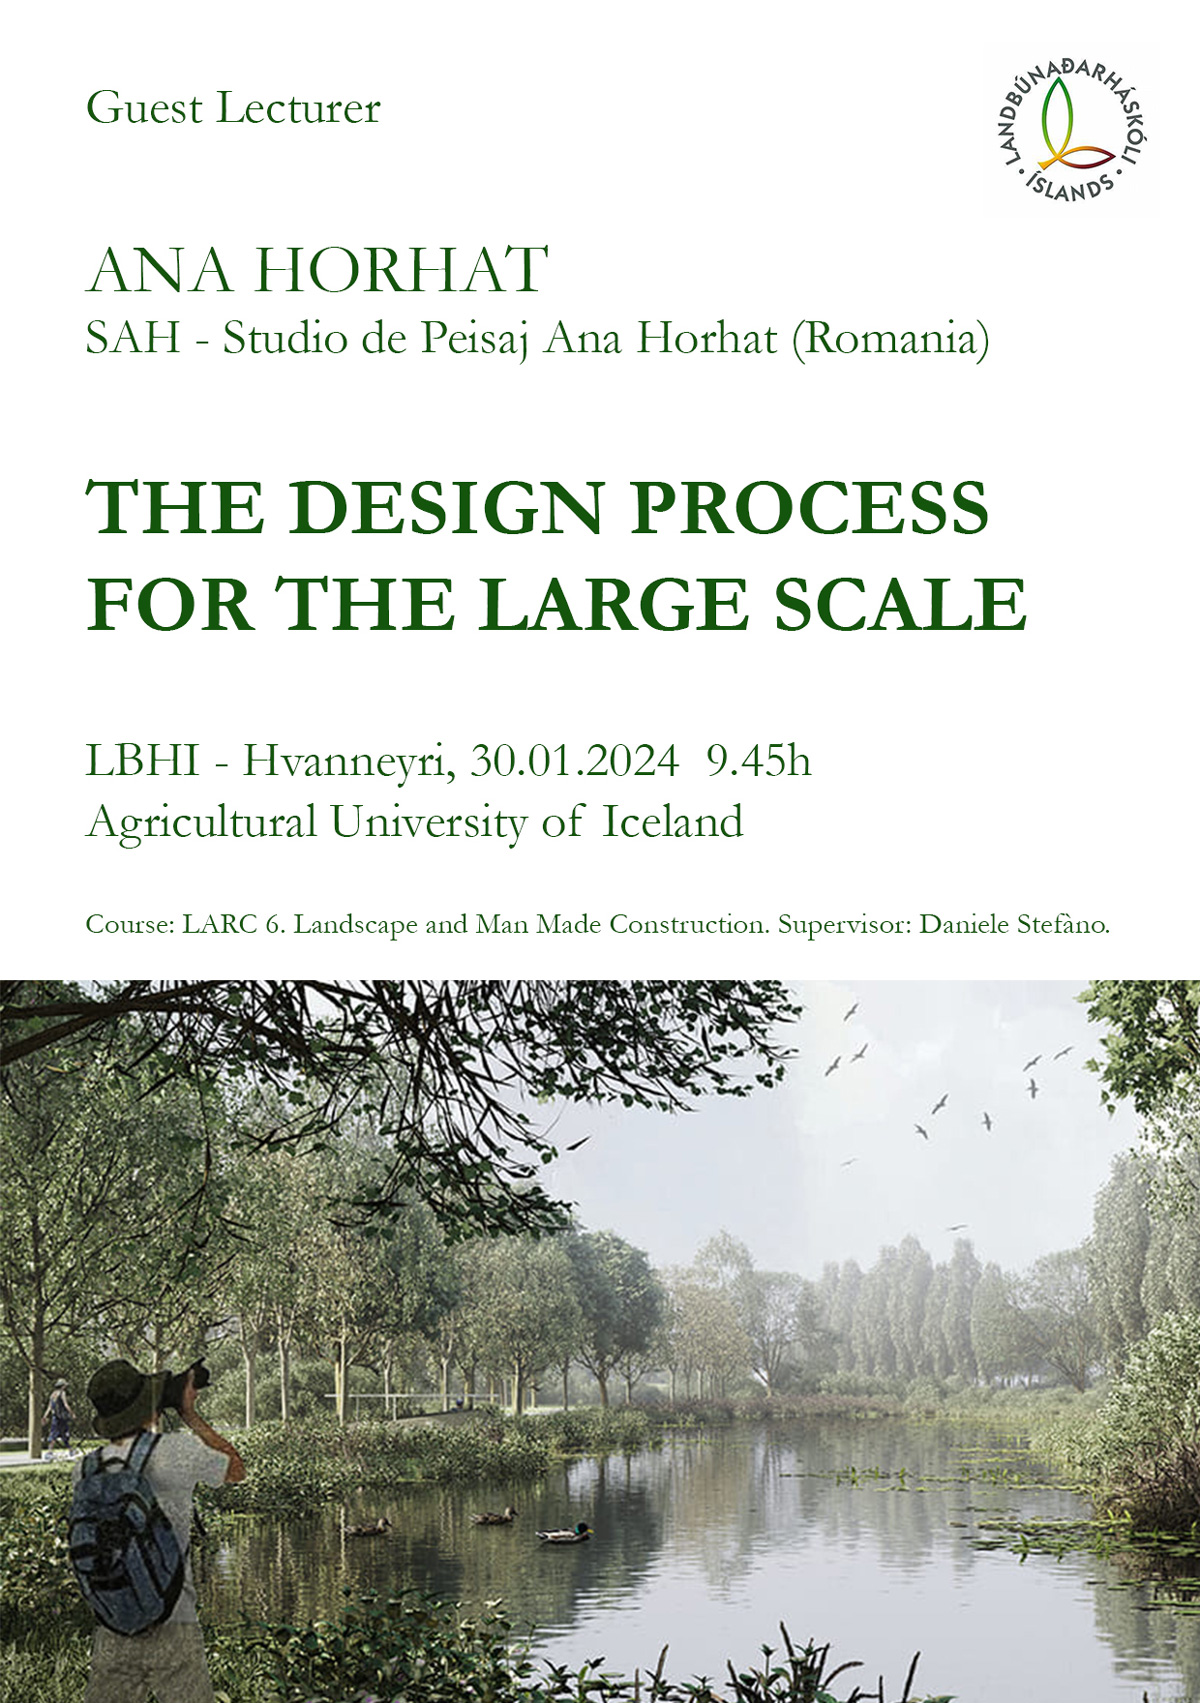 Open guest lecture with Ana Horhat, Landscape Architecture at the Agricultural University of Iceland